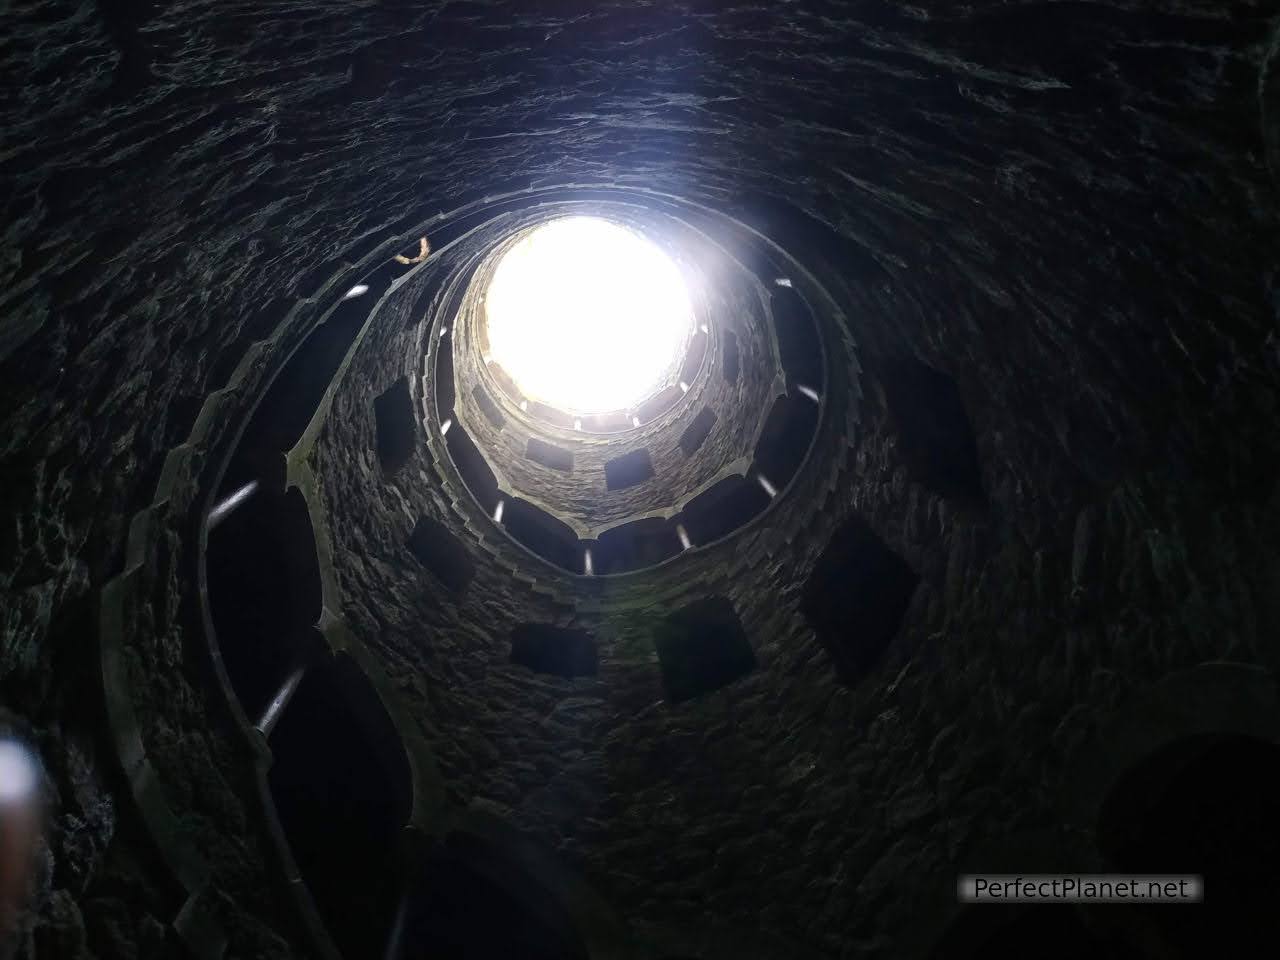 Initiation well